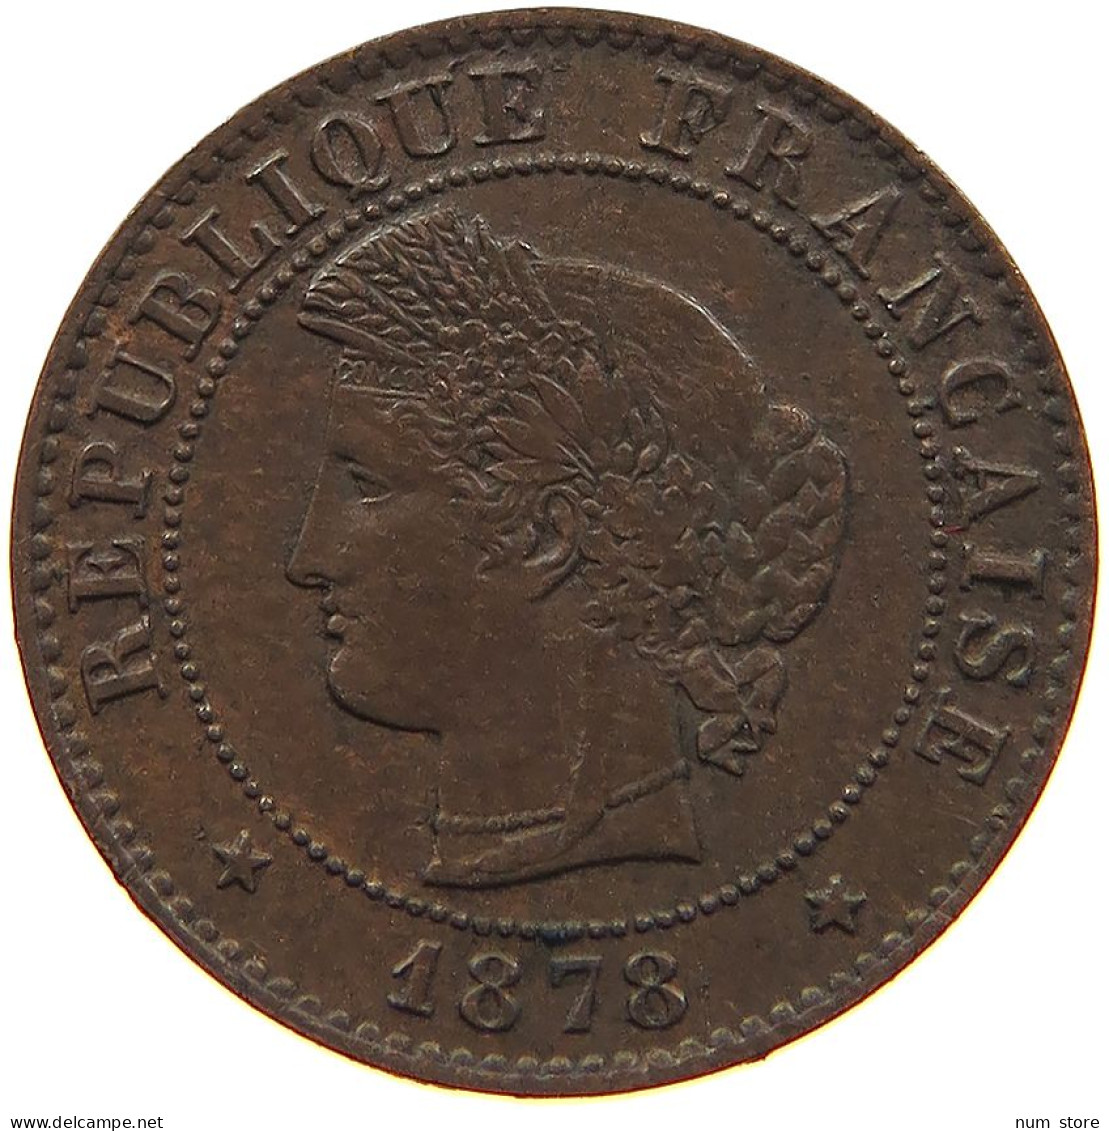 FRANCE 1 CENTIME 1878 A #s081 0295 - 1 Centime